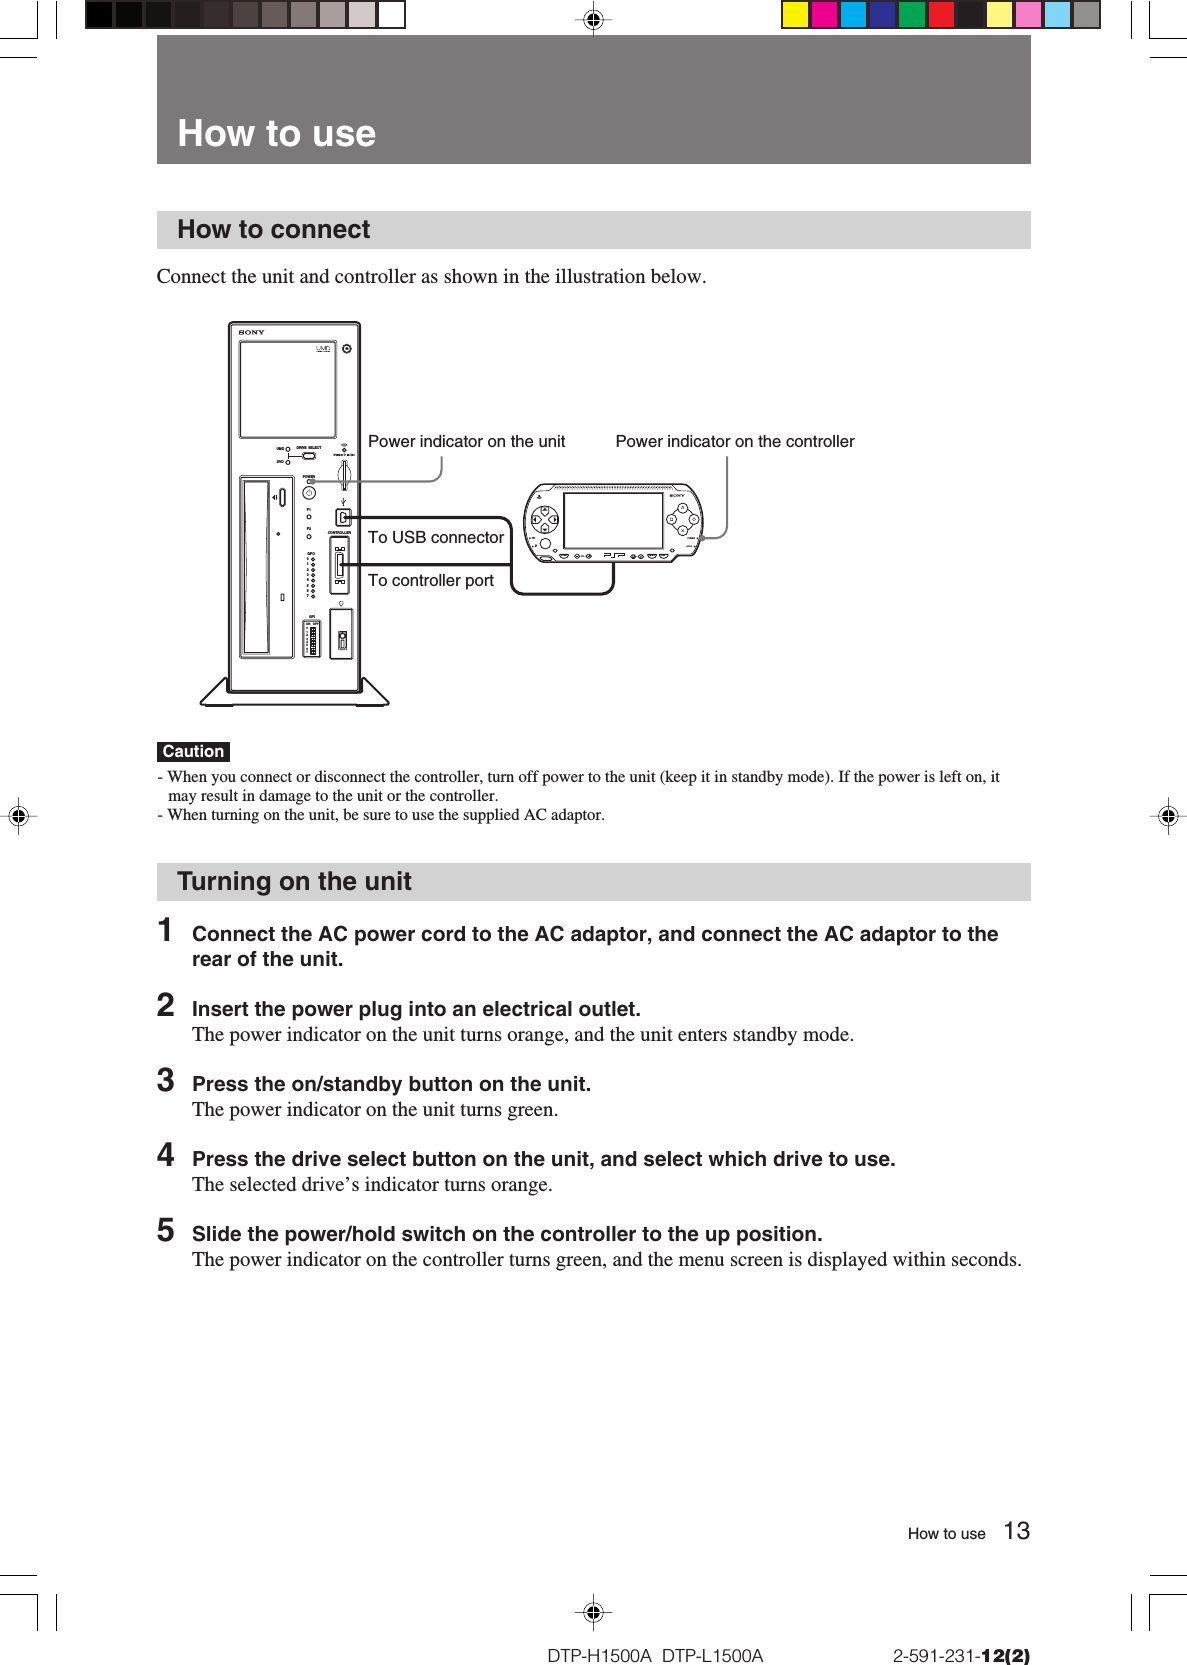 13DTP-H1500A  DTP-L1500A                          2-591-231-12(2)How to connectConnect the unit and controller as shown in the illustration below.Caution- When you connect or disconnect the controller, turn off power to the unit (keep it in standby mode). If the power is left on, itmay result in damage to the unit or the controller.- When turning on the unit, be sure to use the supplied AC adaptor.Turning on the unit1Connect the AC power cord to the AC adaptor, and connect the AC adaptor to therear of the unit.2Insert the power plug into an electrical outlet.The power indicator on the unit turns orange, and the unit enters standby mode.3Press the on/standby button on the unit.The power indicator on the unit turns green.4Press the drive select button on the unit, and select which drive to use.The selected drive’s indicator turns orange.5Slide the power/hold switch on the controller to the up position.The power indicator on the controller turns green, and the menu screen is displayed within seconds.How to useHow to useDRIVE  SELECTPOWERF1F2UMDCONTROLLERGPOGPION OFFDVD0765432101234567POWERHOLDSELECTHOME VOL STARTPower indicator on the unit Power indicator on the controllerTo controller portTo USB connector